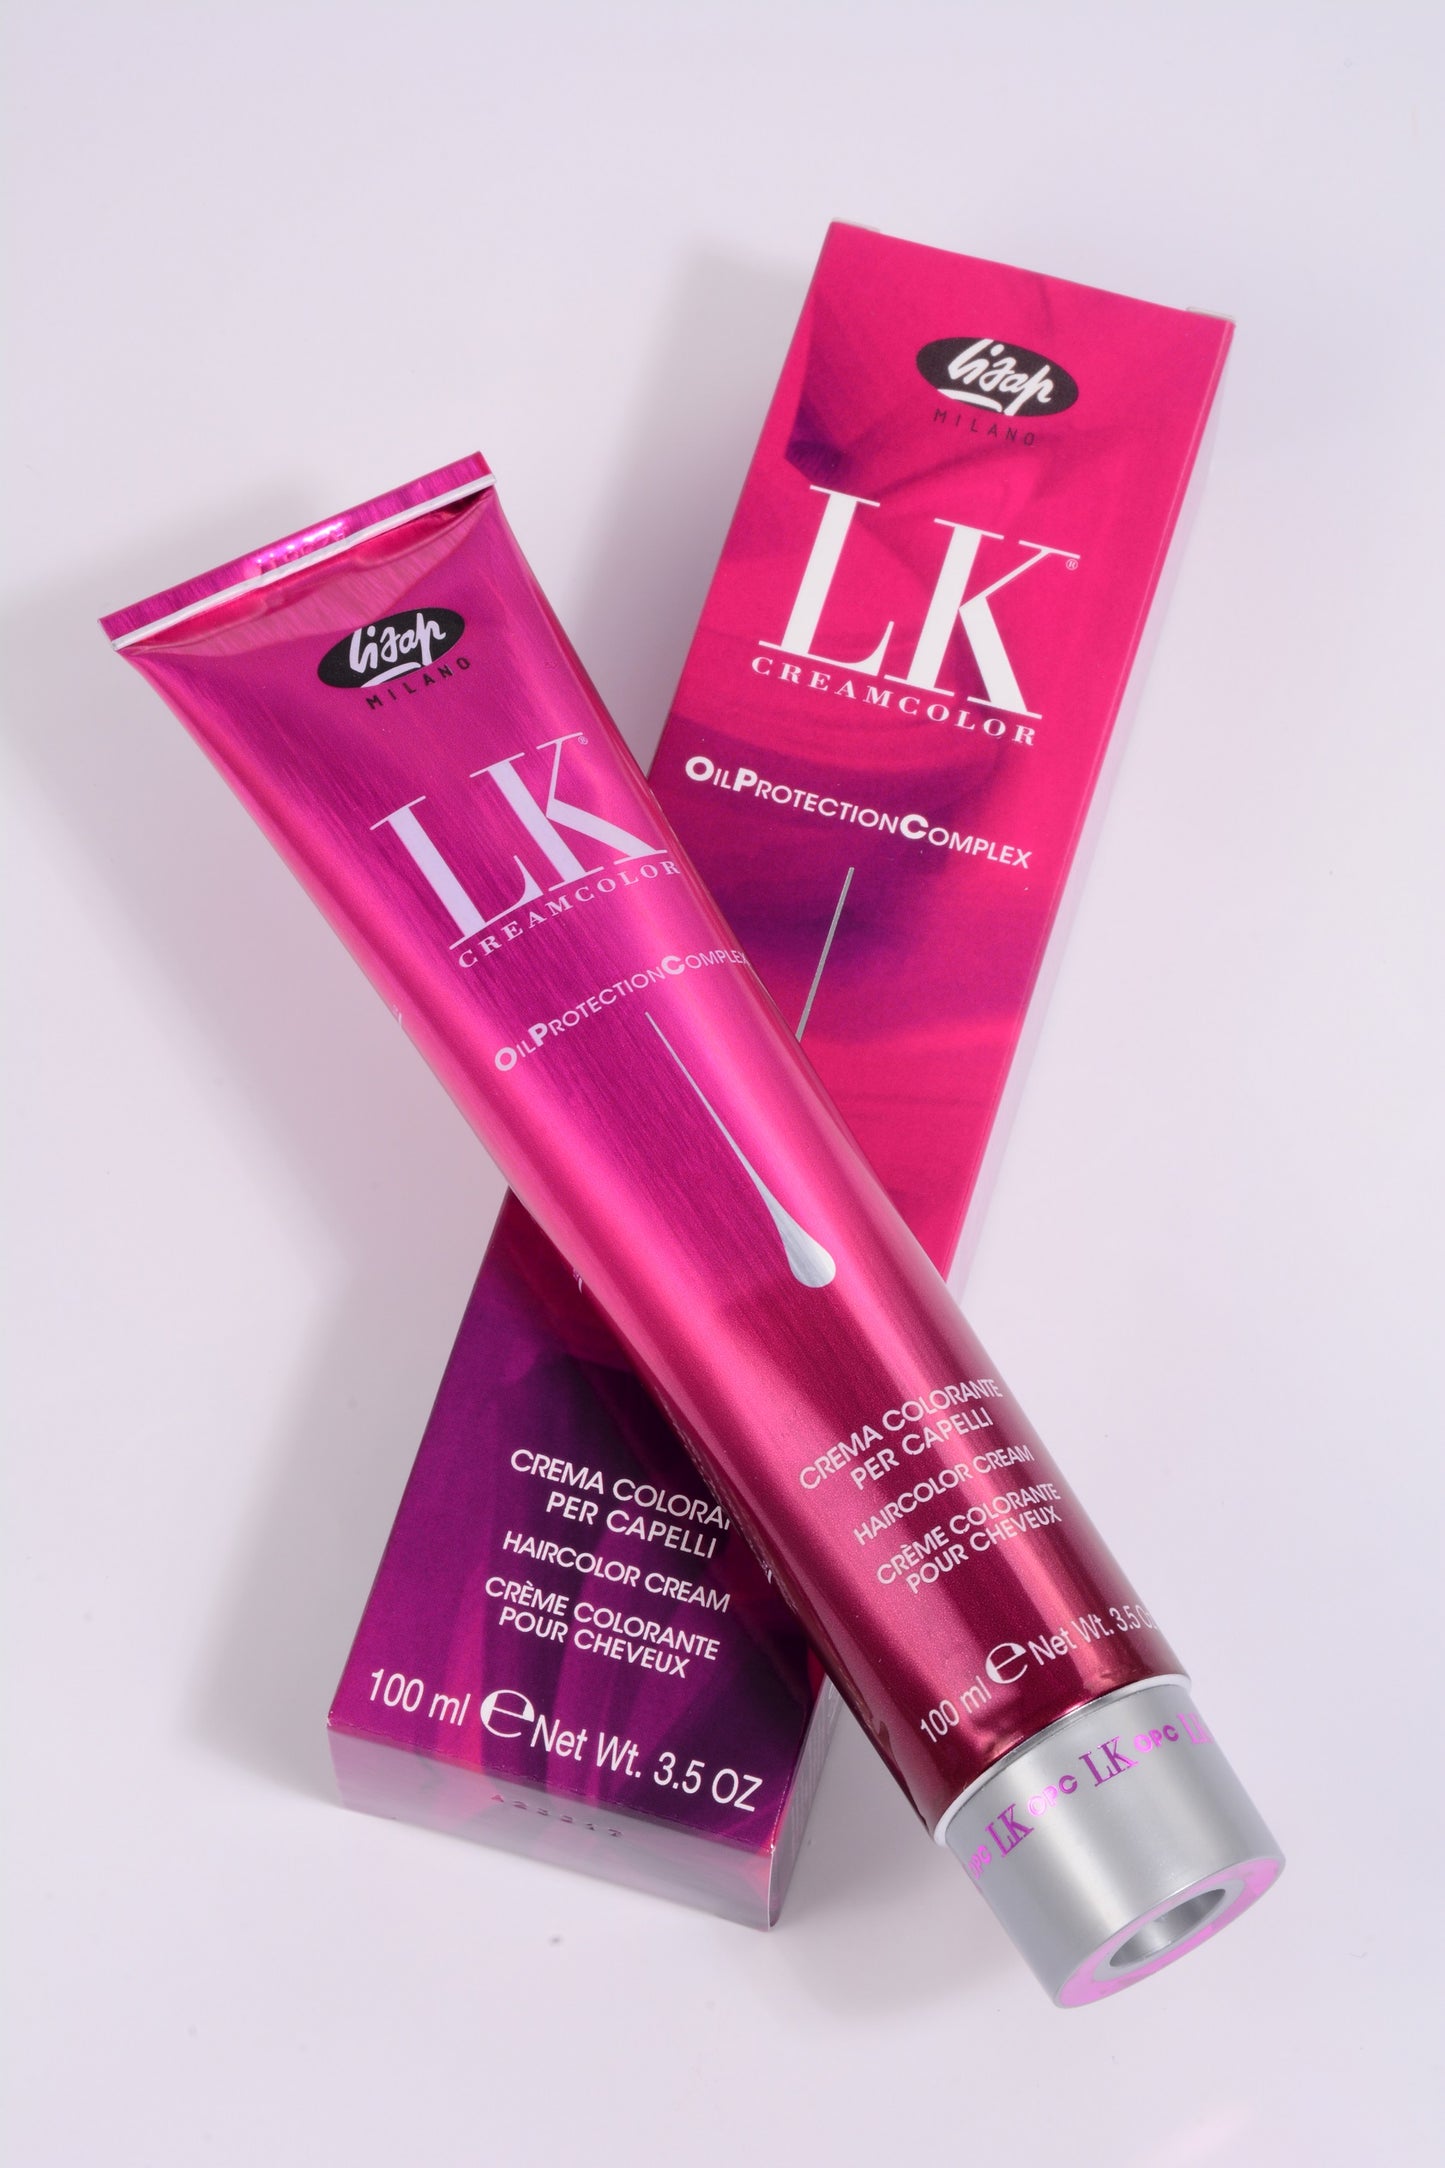 LK Creamcolor 7/2 Oil Protection Complex